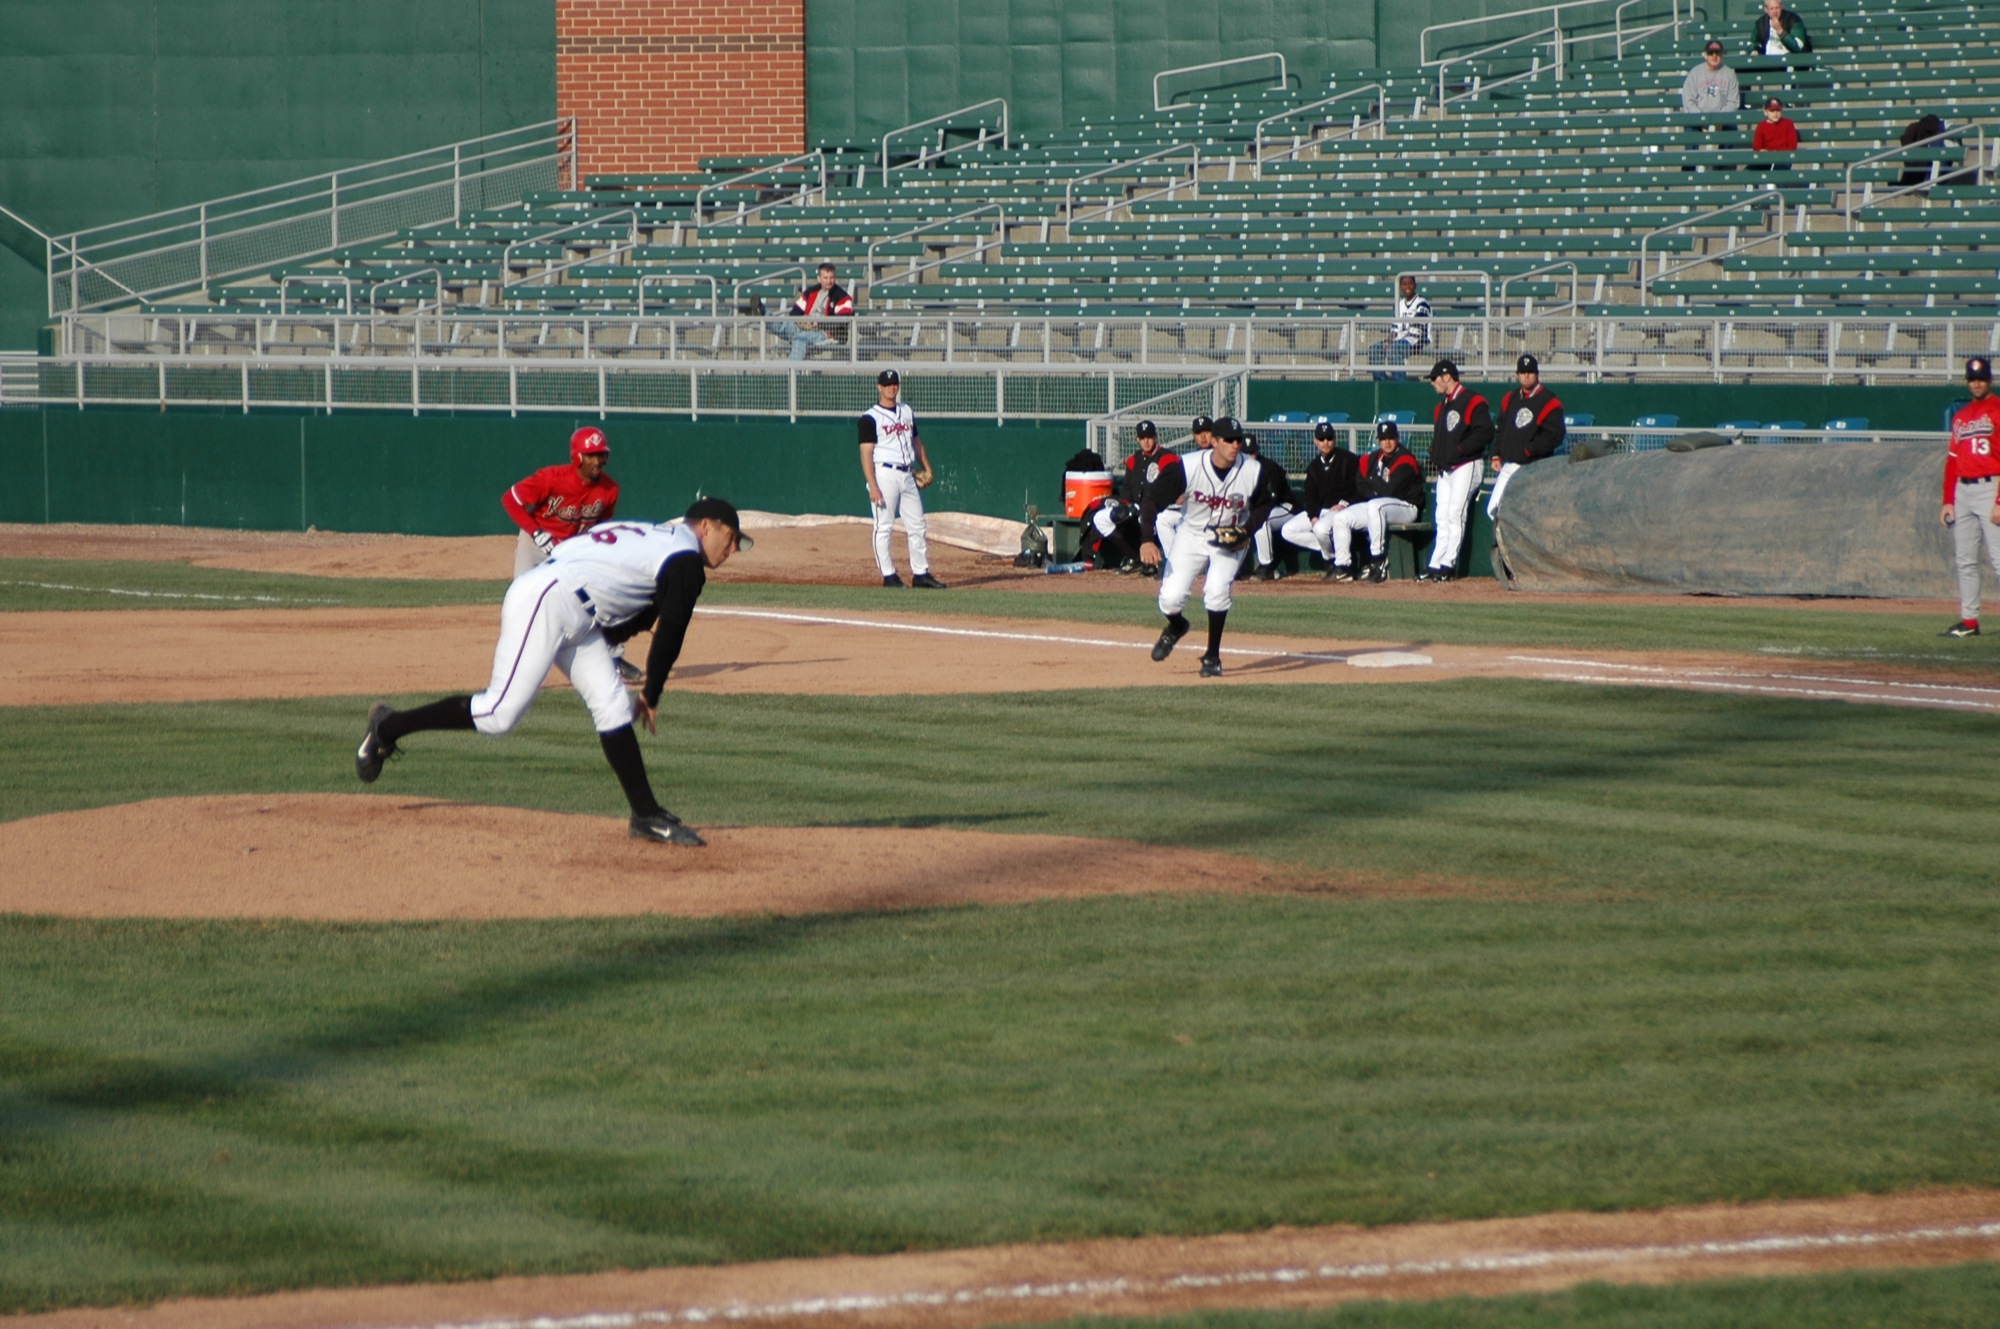 baseball players on a field during a game